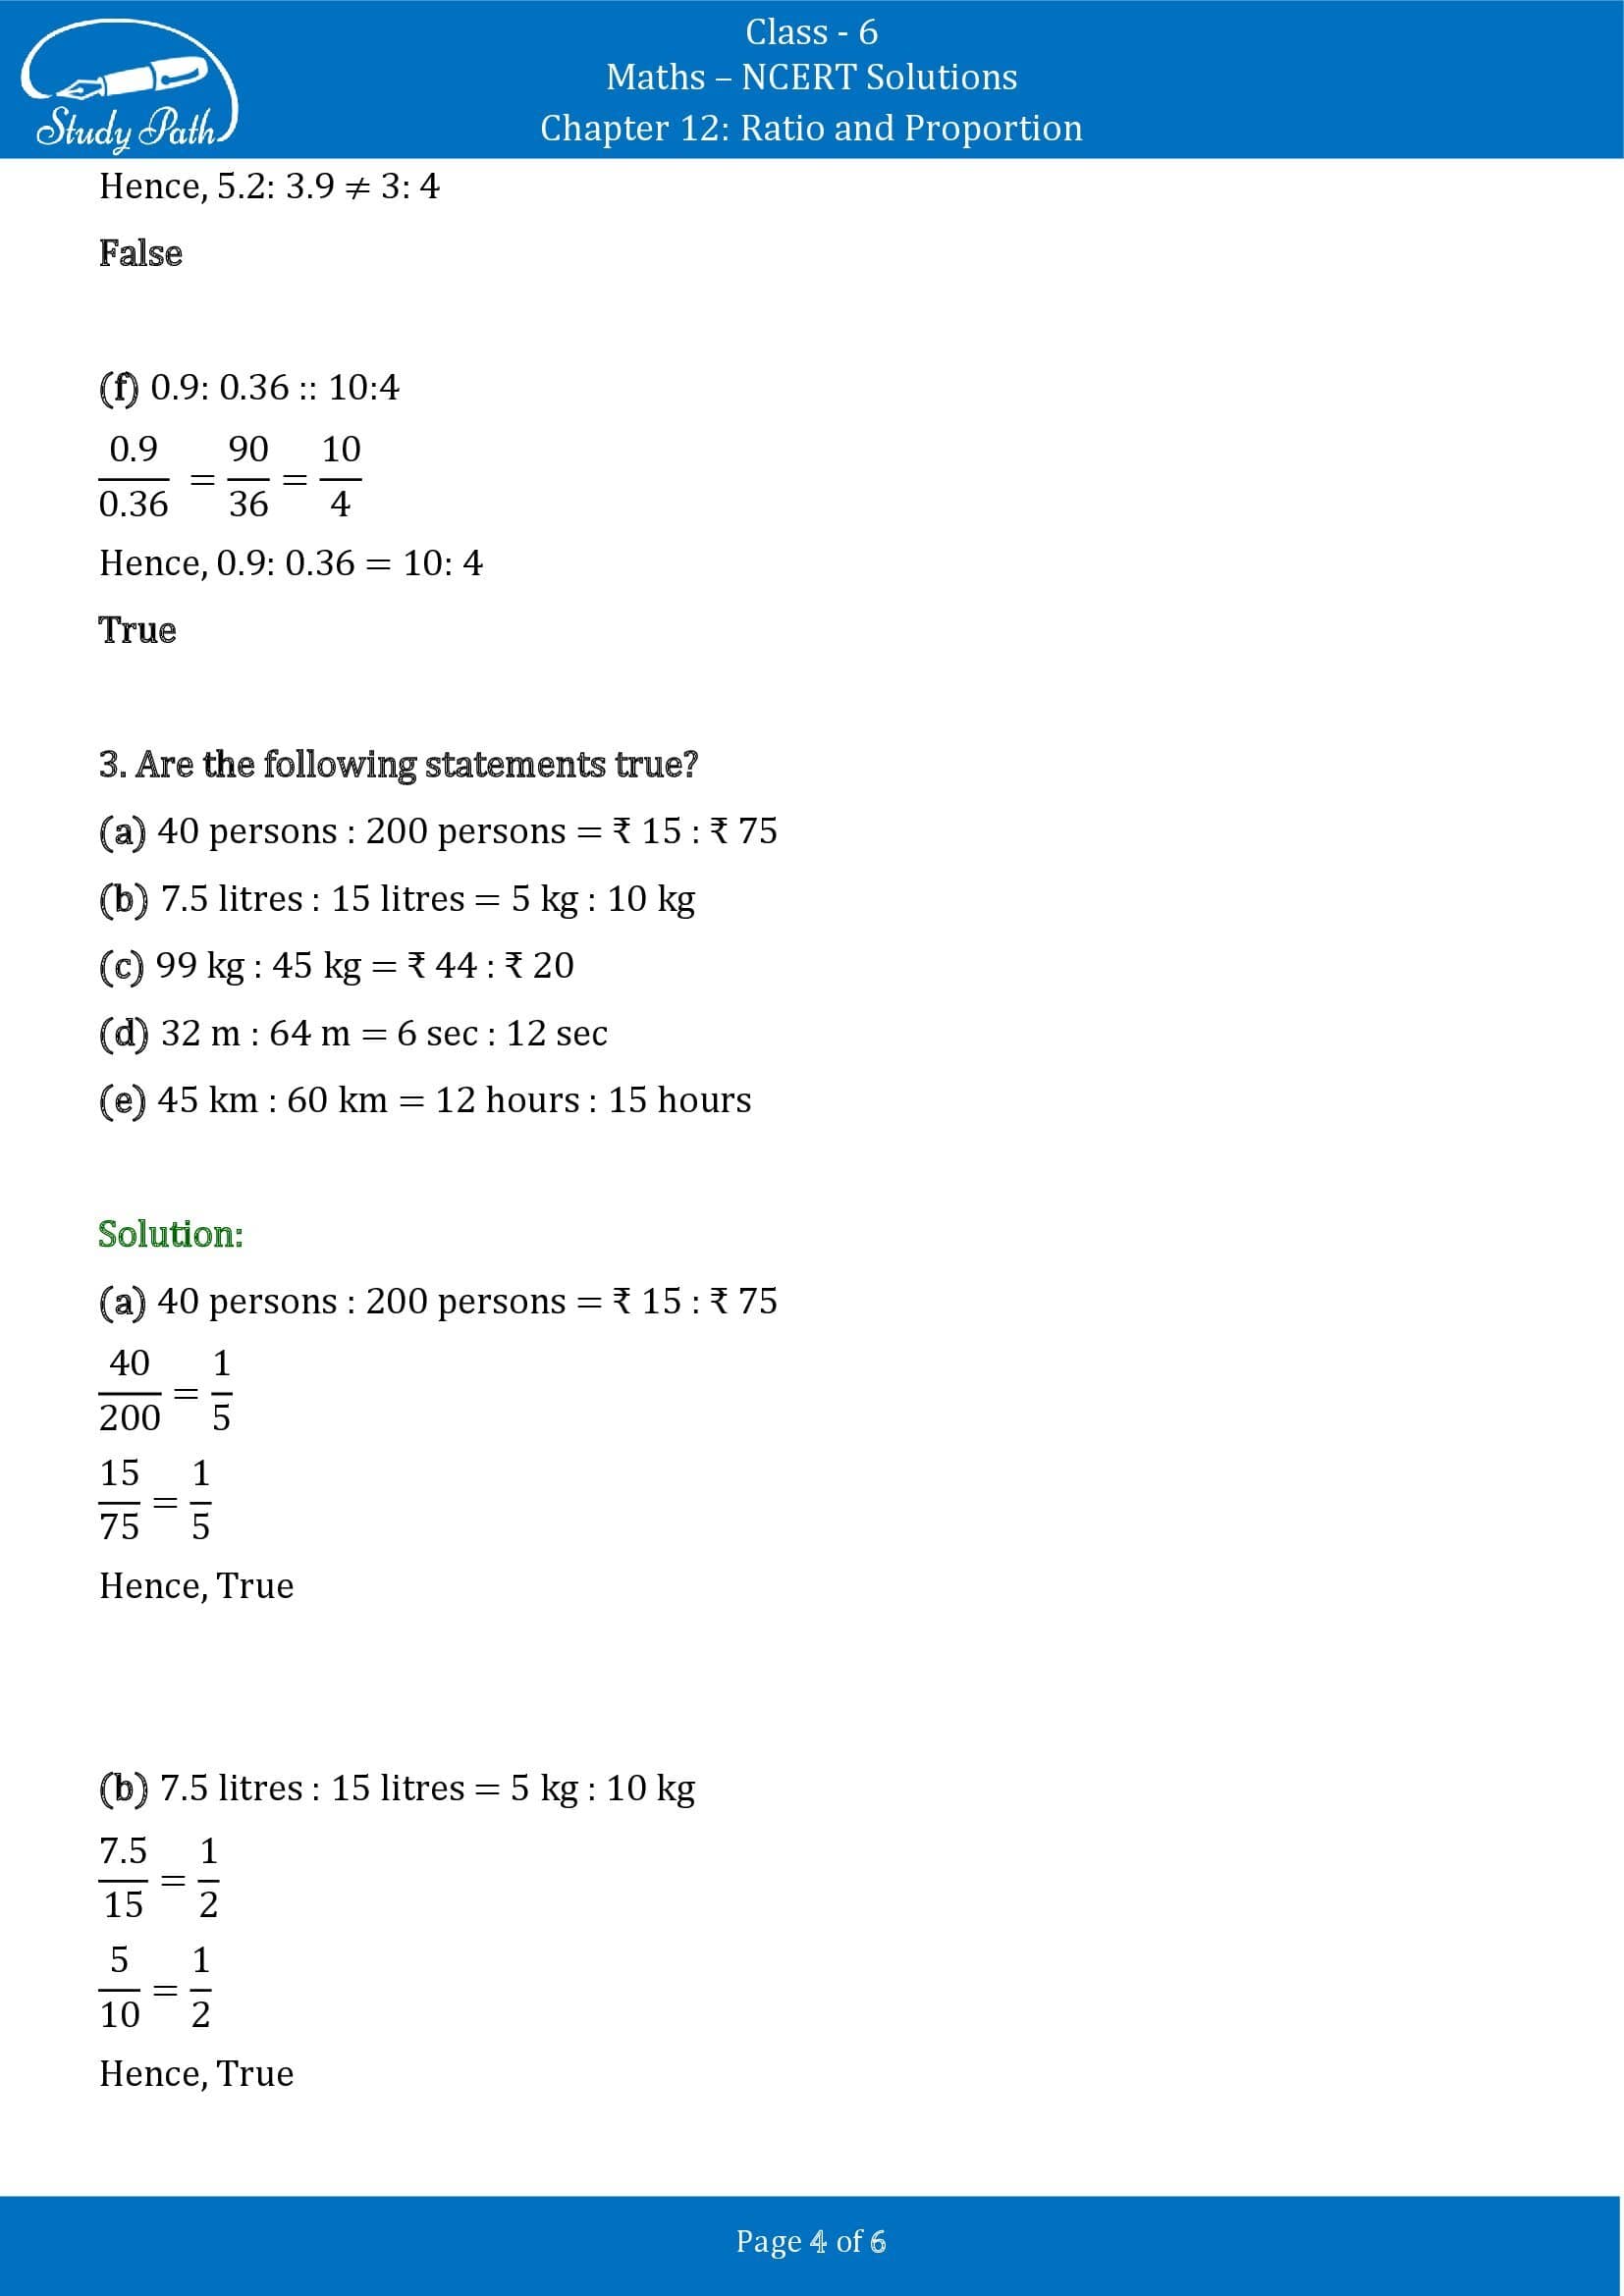 NCERT Solutions for Class 6 Maths Chapter 12 Ratio and Proportion Exercise 12.2 00004